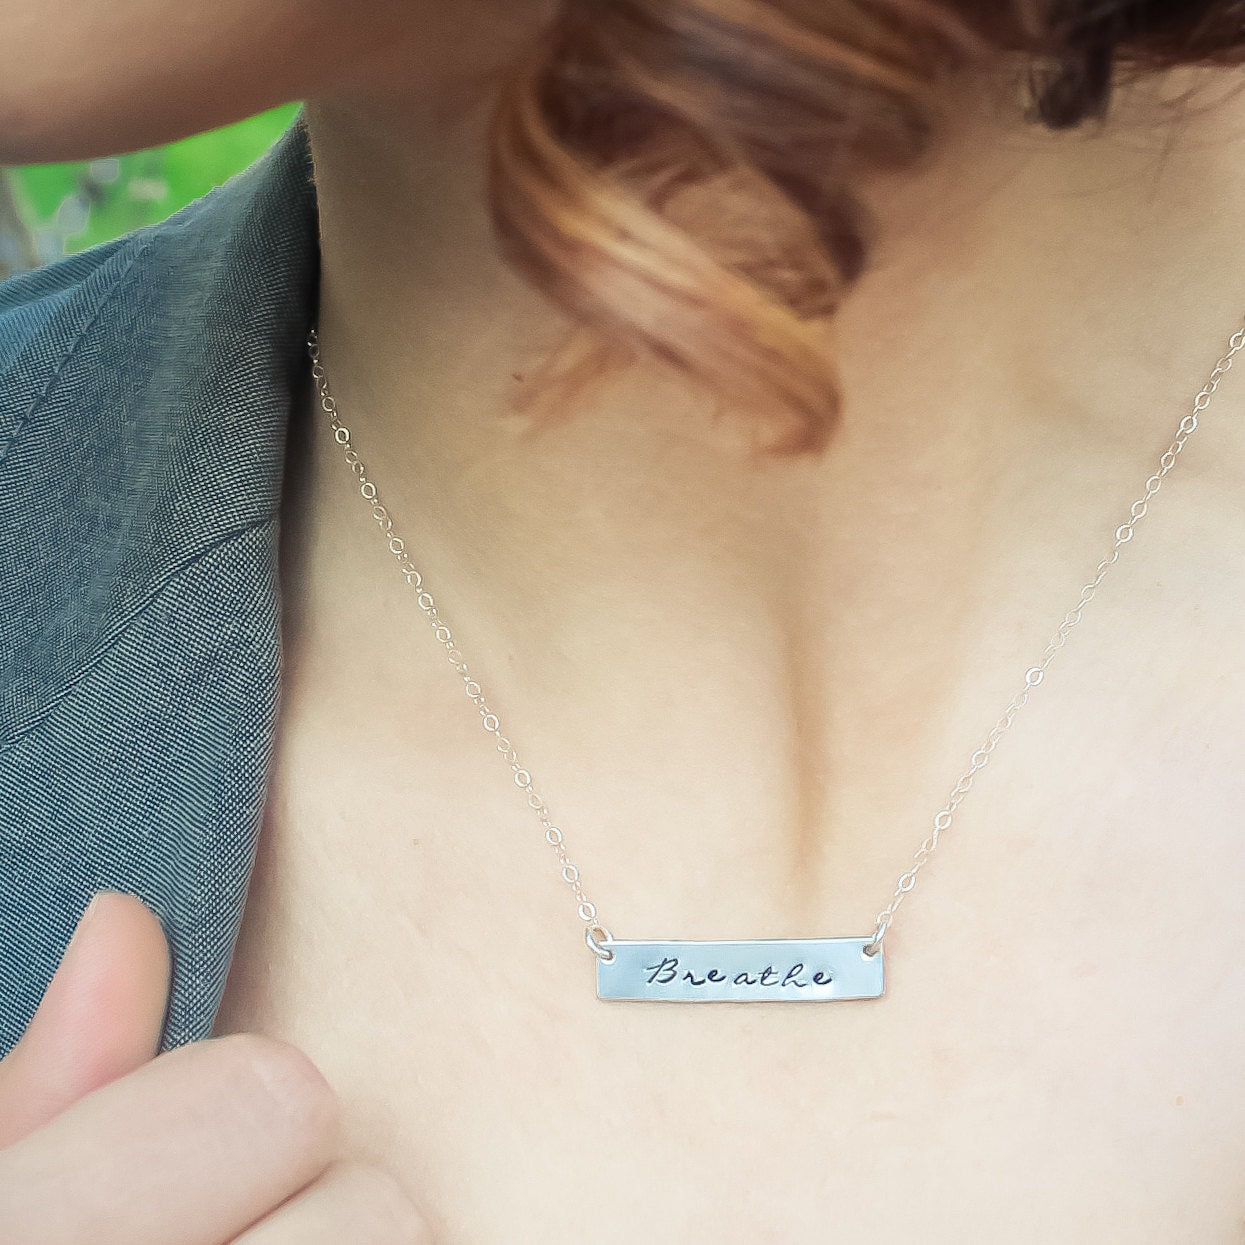 Sterling Silver Bar Necklace, Name Bar Necklace, Personalized Bar Necklace, Silver Bar Necklace, Breathe Necklace, Hand Stamped Jewelry